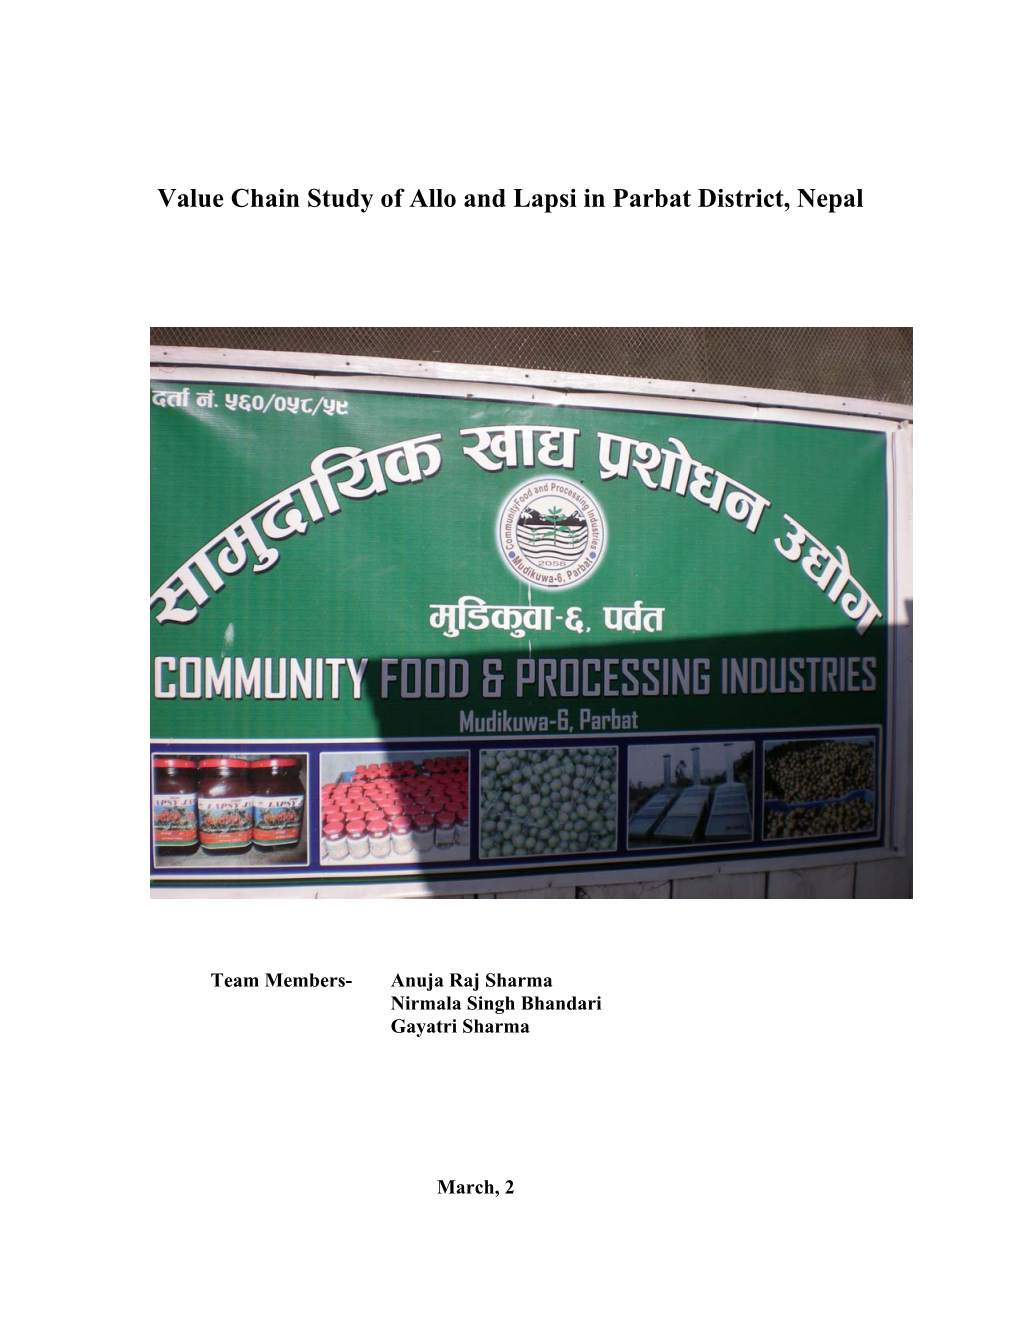 Value Chain Study of Allo and Lapsi in Parbat District, Nepal